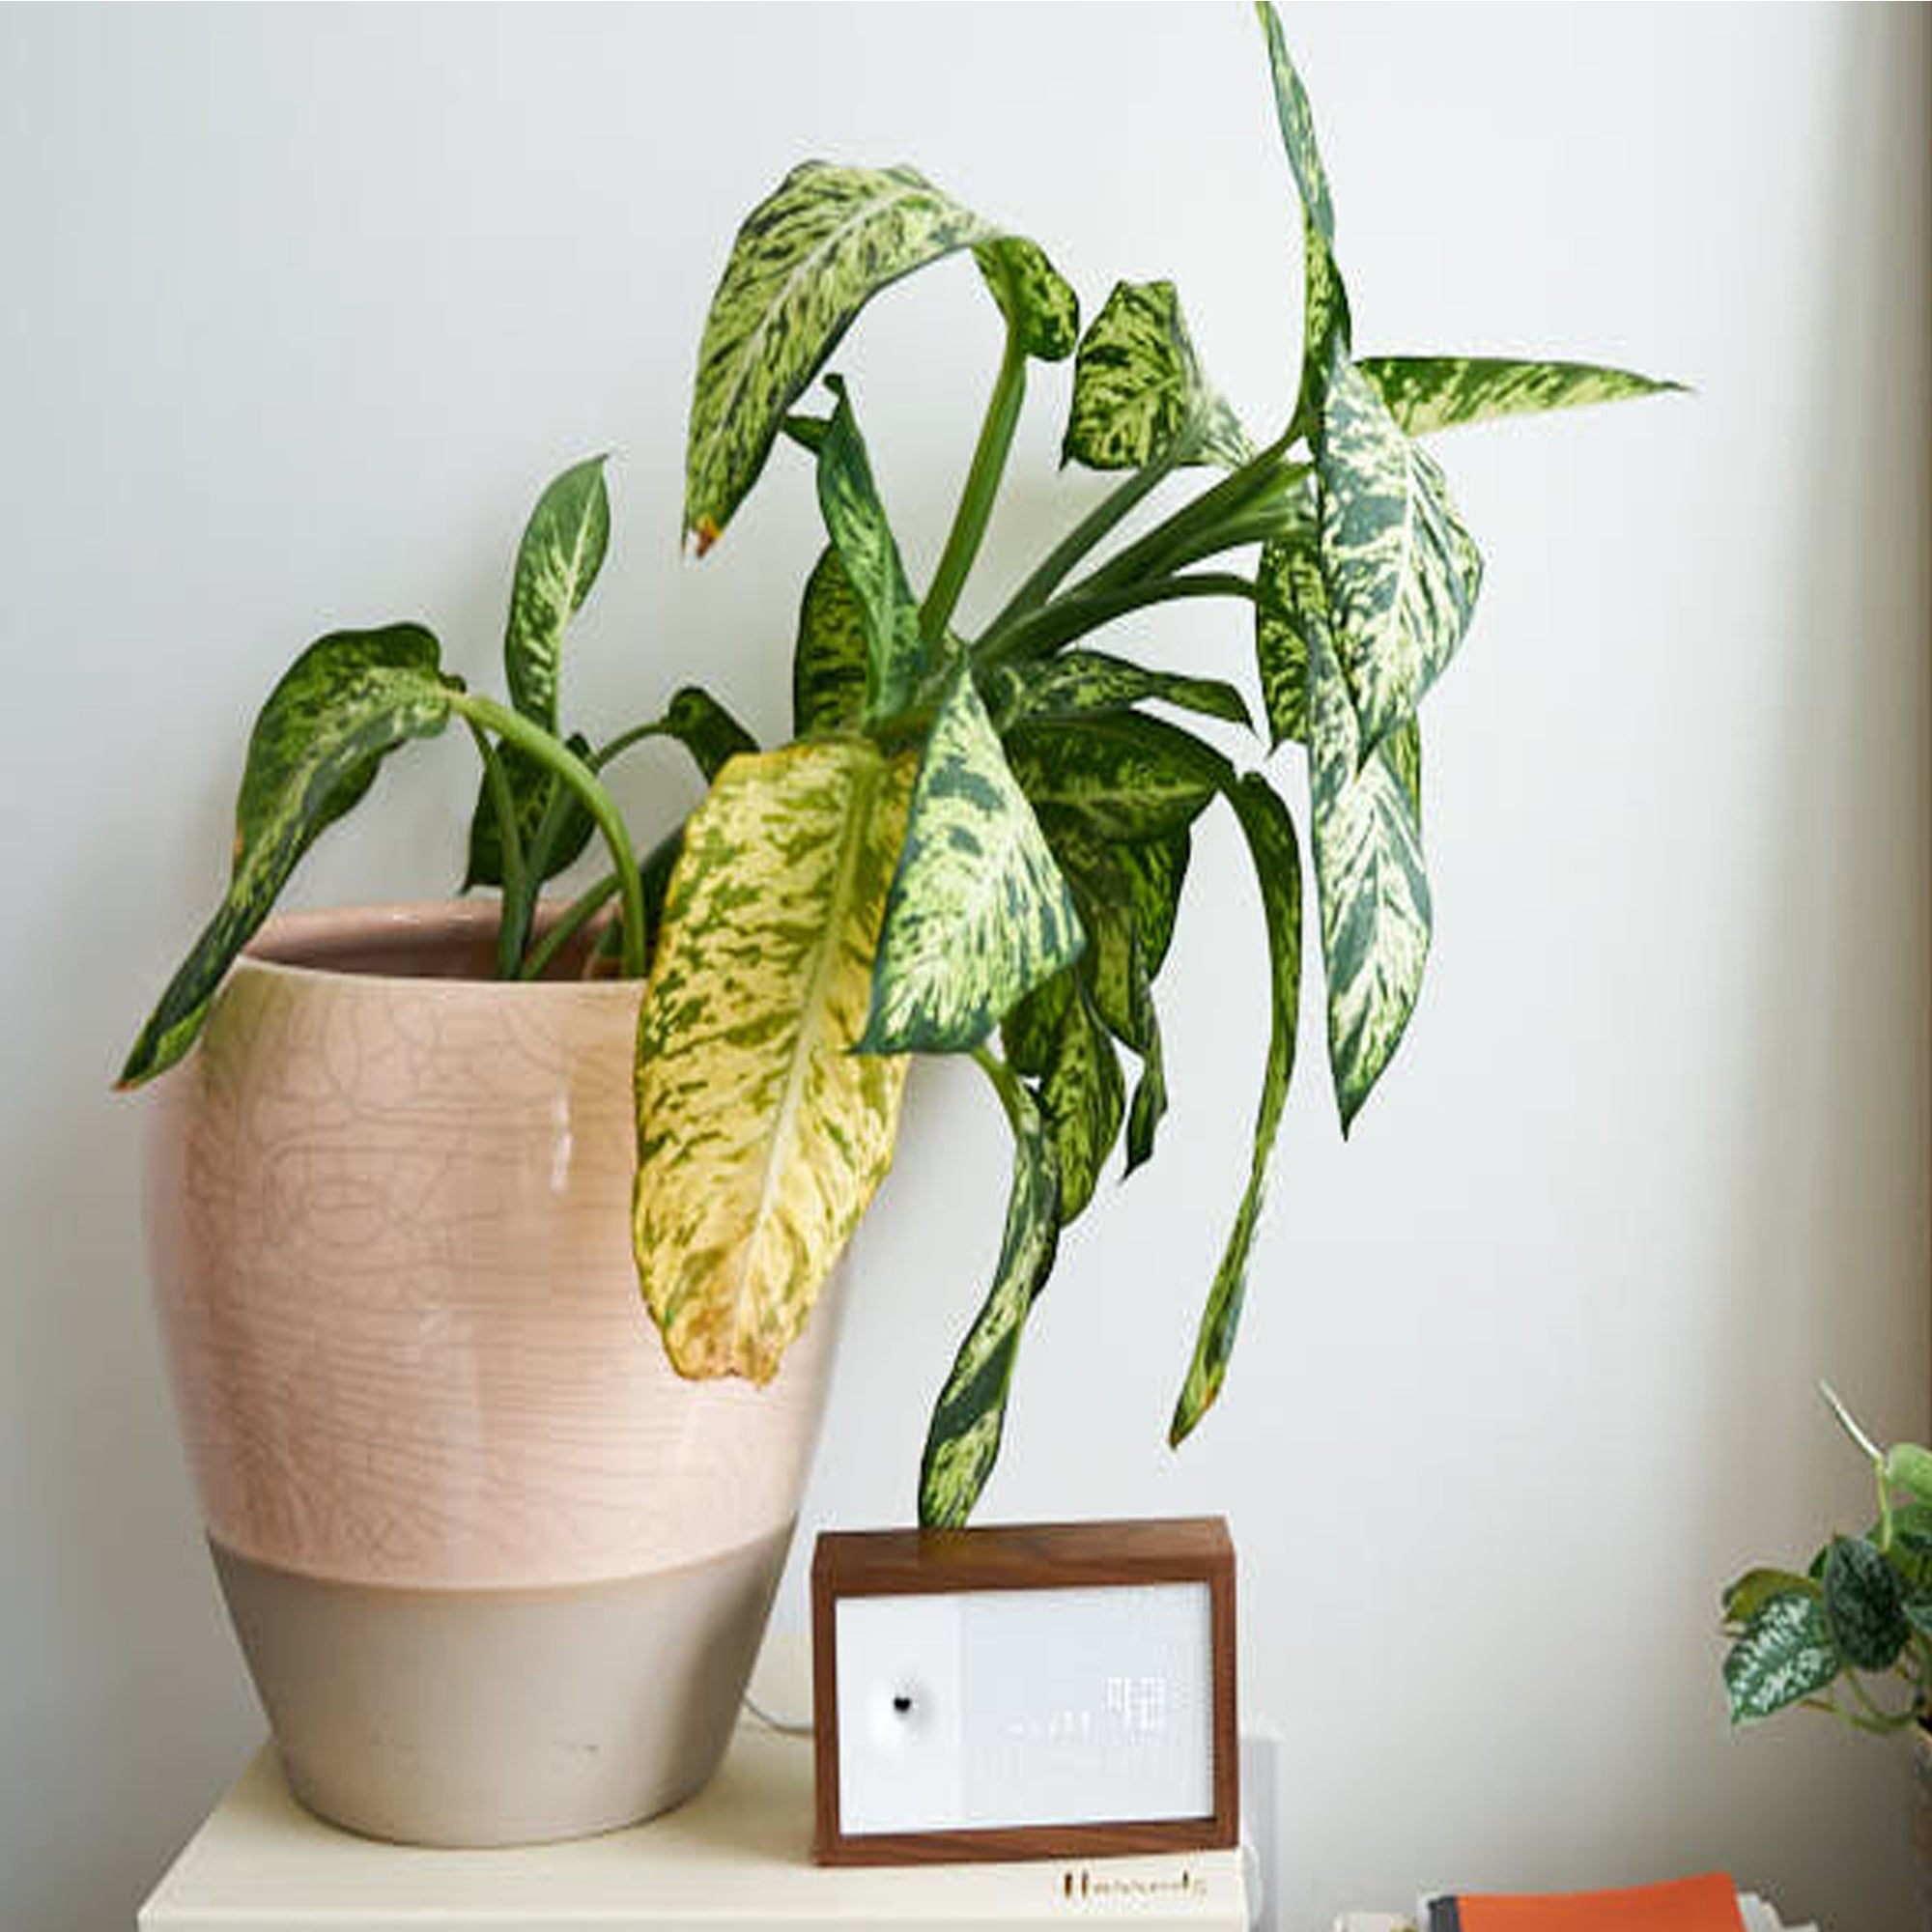 Plant Problems: Signs your plant isn’t living their best life